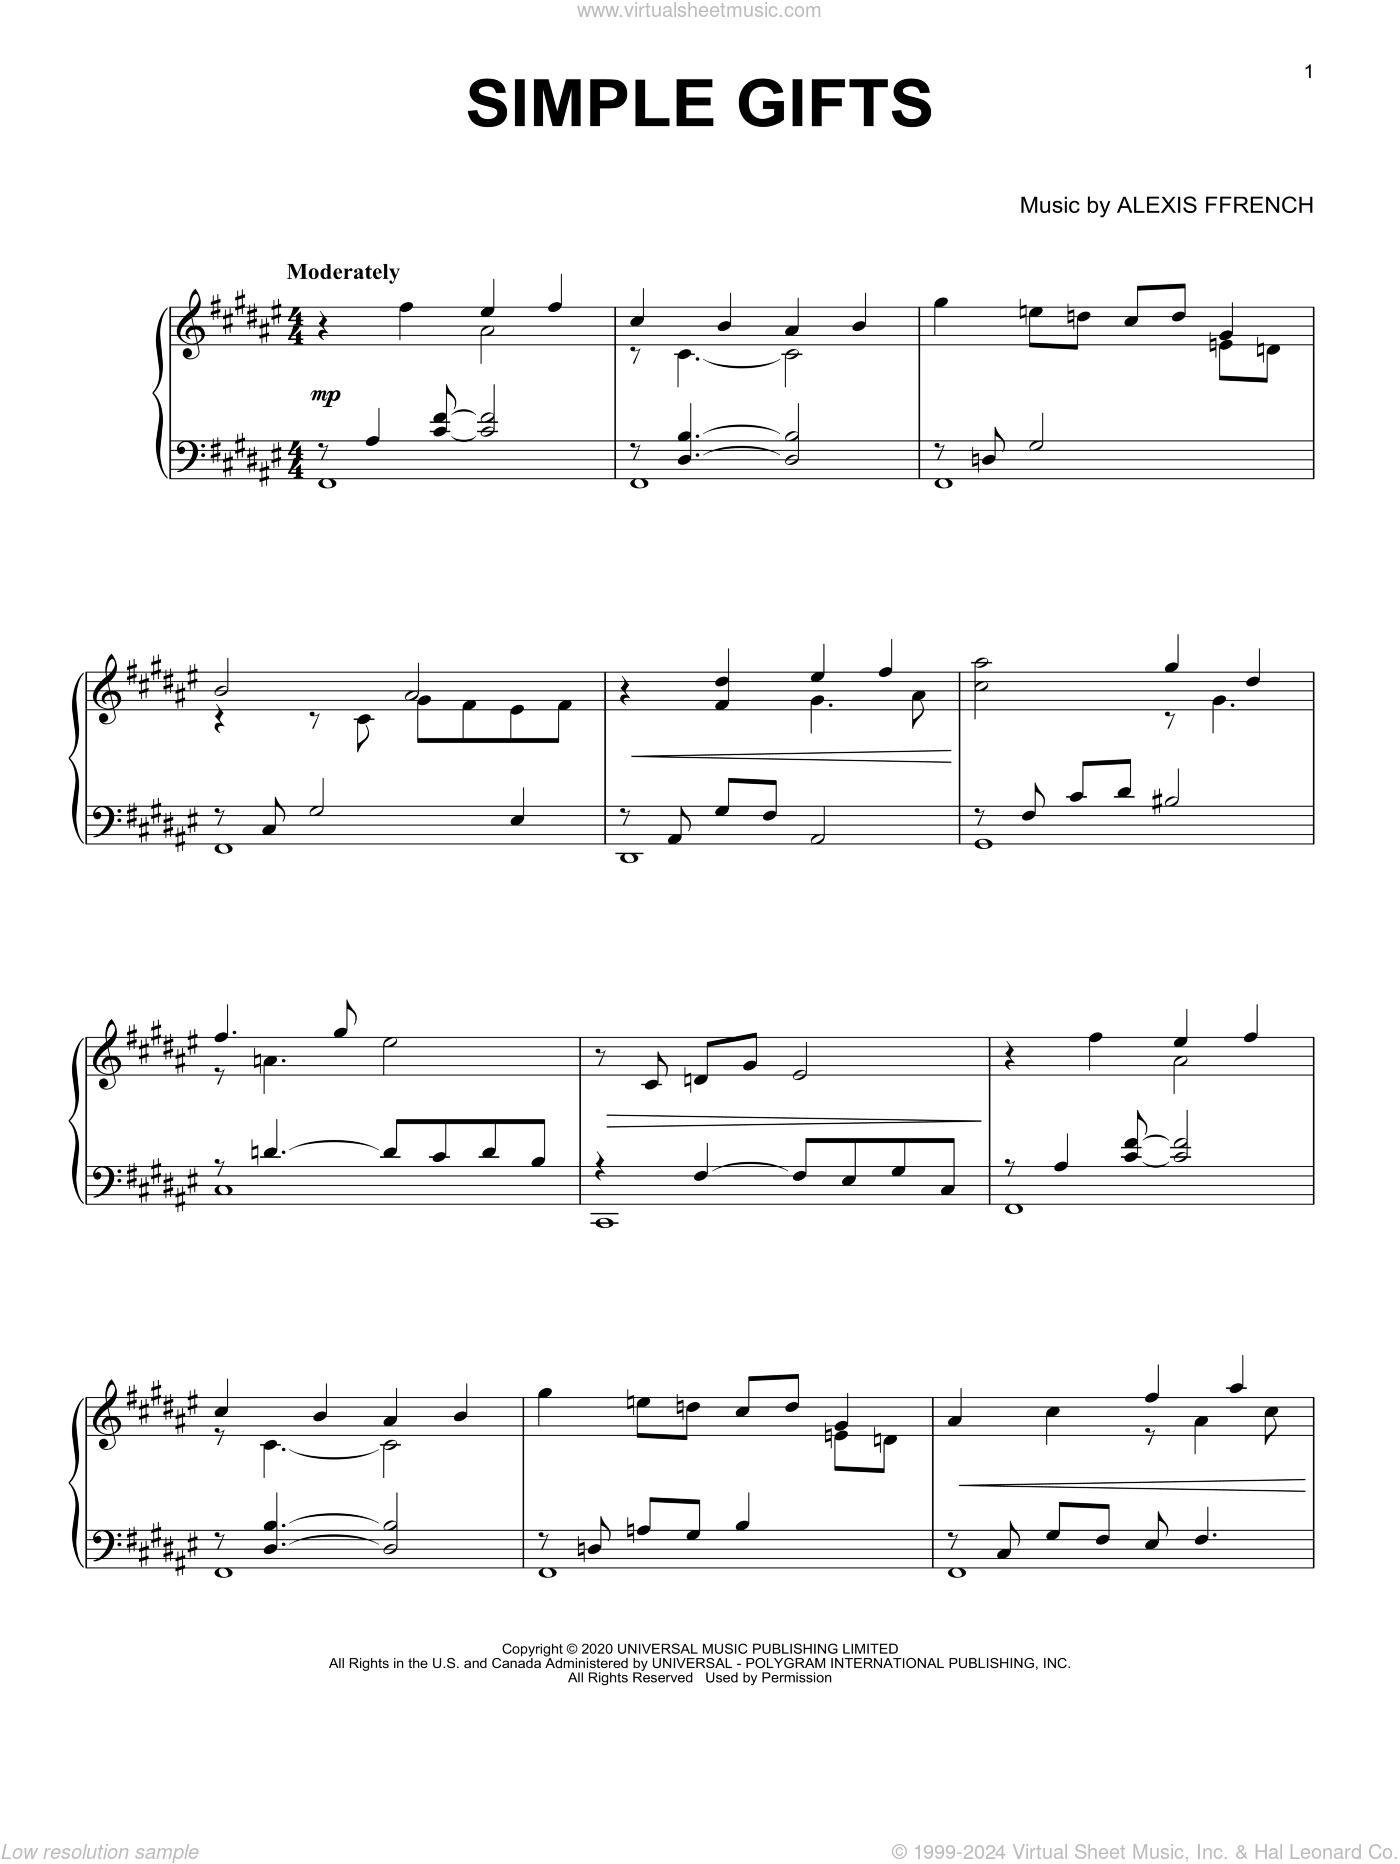 Free Piano Arrangement Sheet Music - Simple Gifts. Easy Level